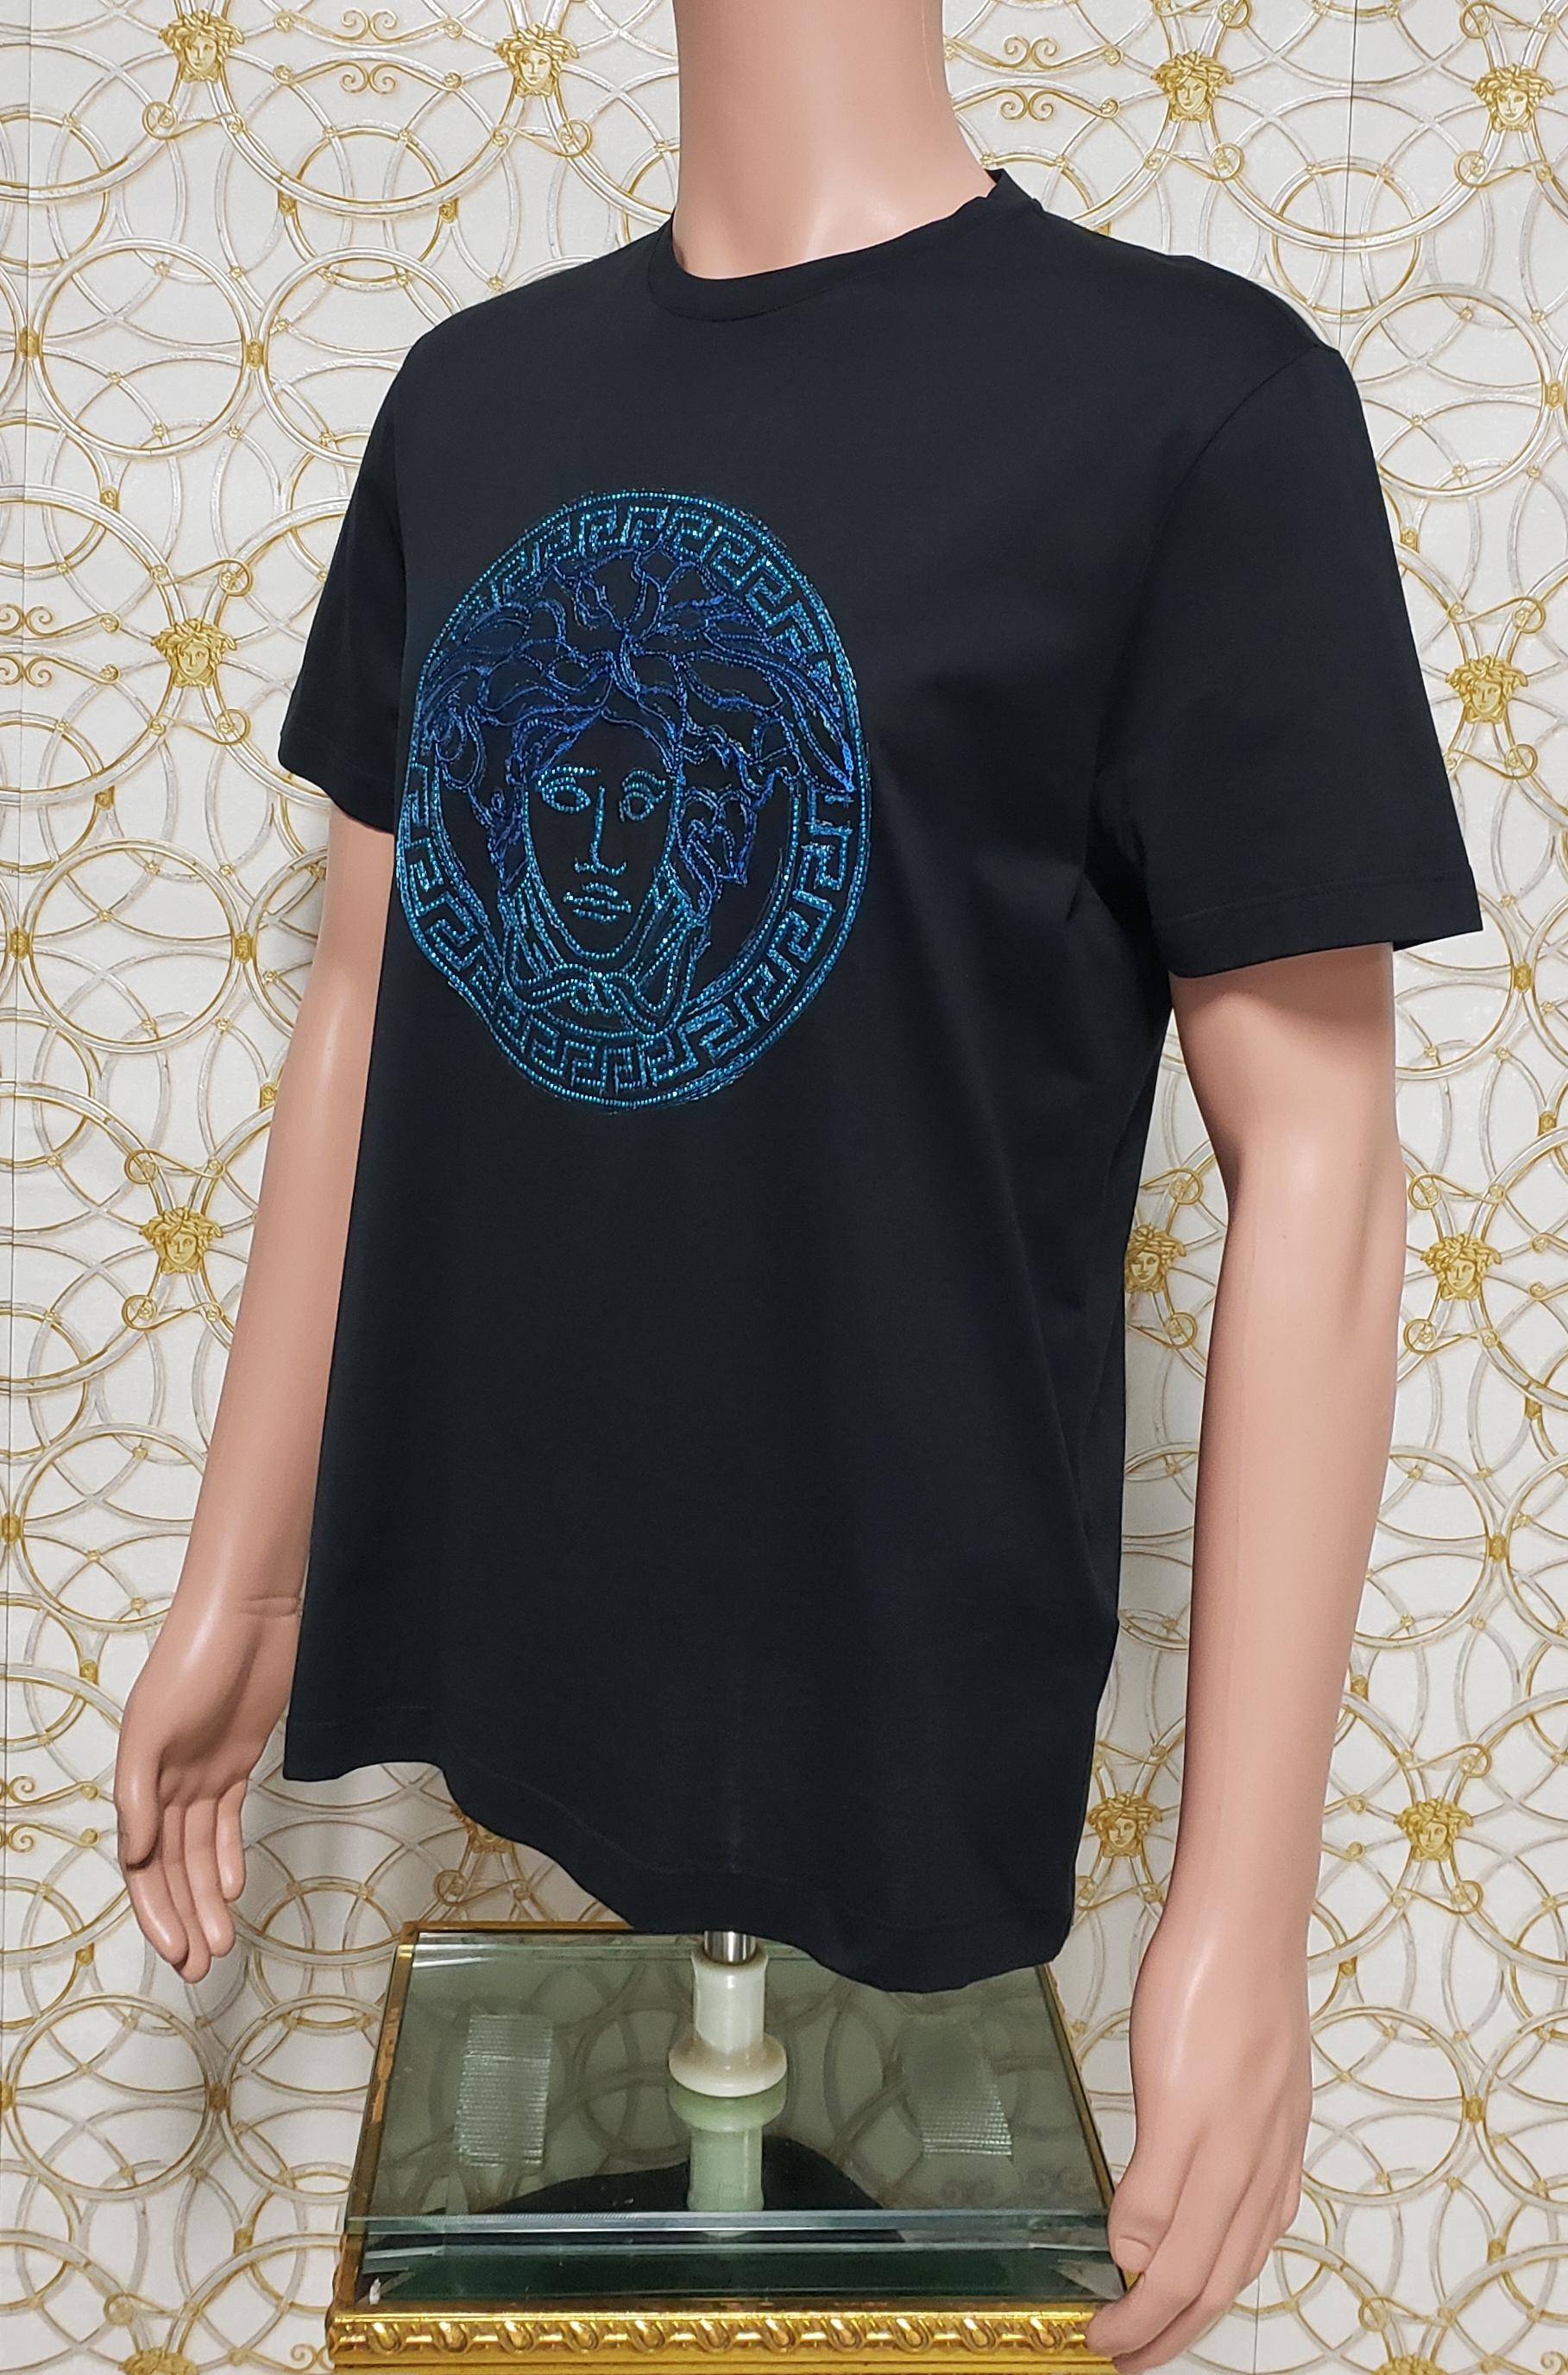 VERSACE 

BLACK T-SHIRT BEADED with BLUE SEQUIN

Color: black

Slim fit
Short sleeves 
Made in Italy

Content: 100% cotton 


size M

shoulder to shoulder 19